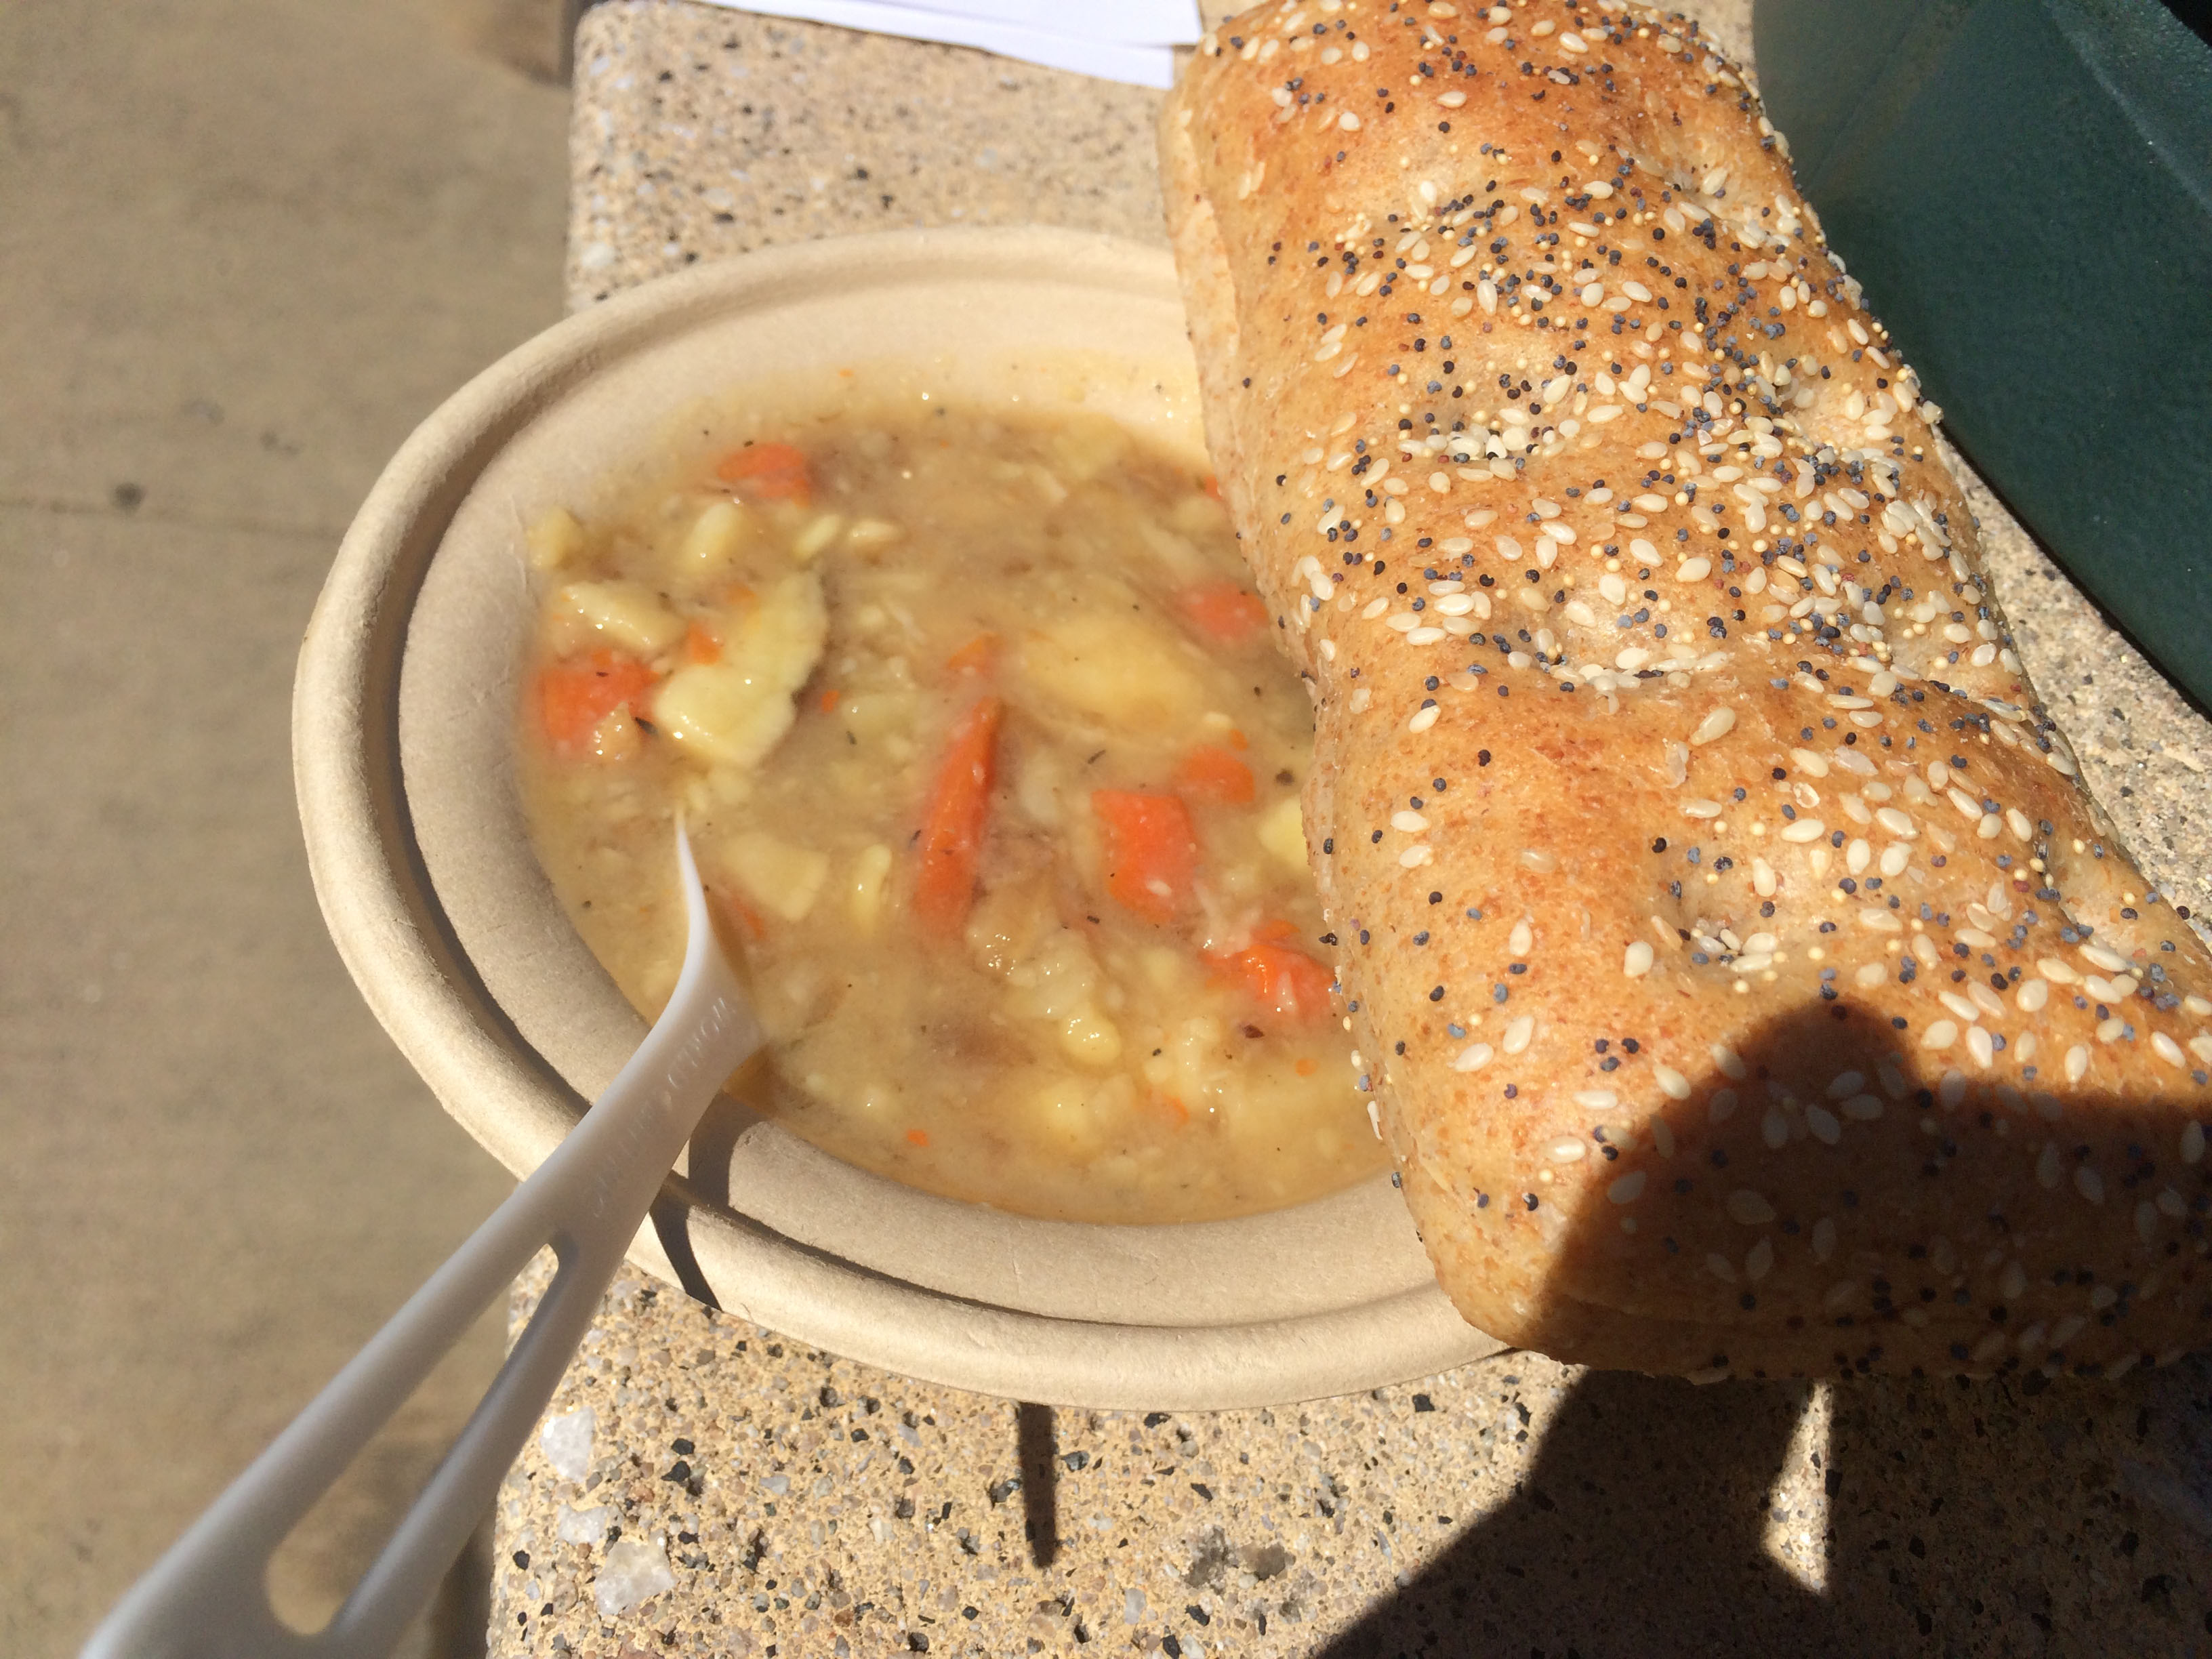 soup and bread from Feeding the 5000: Oakland